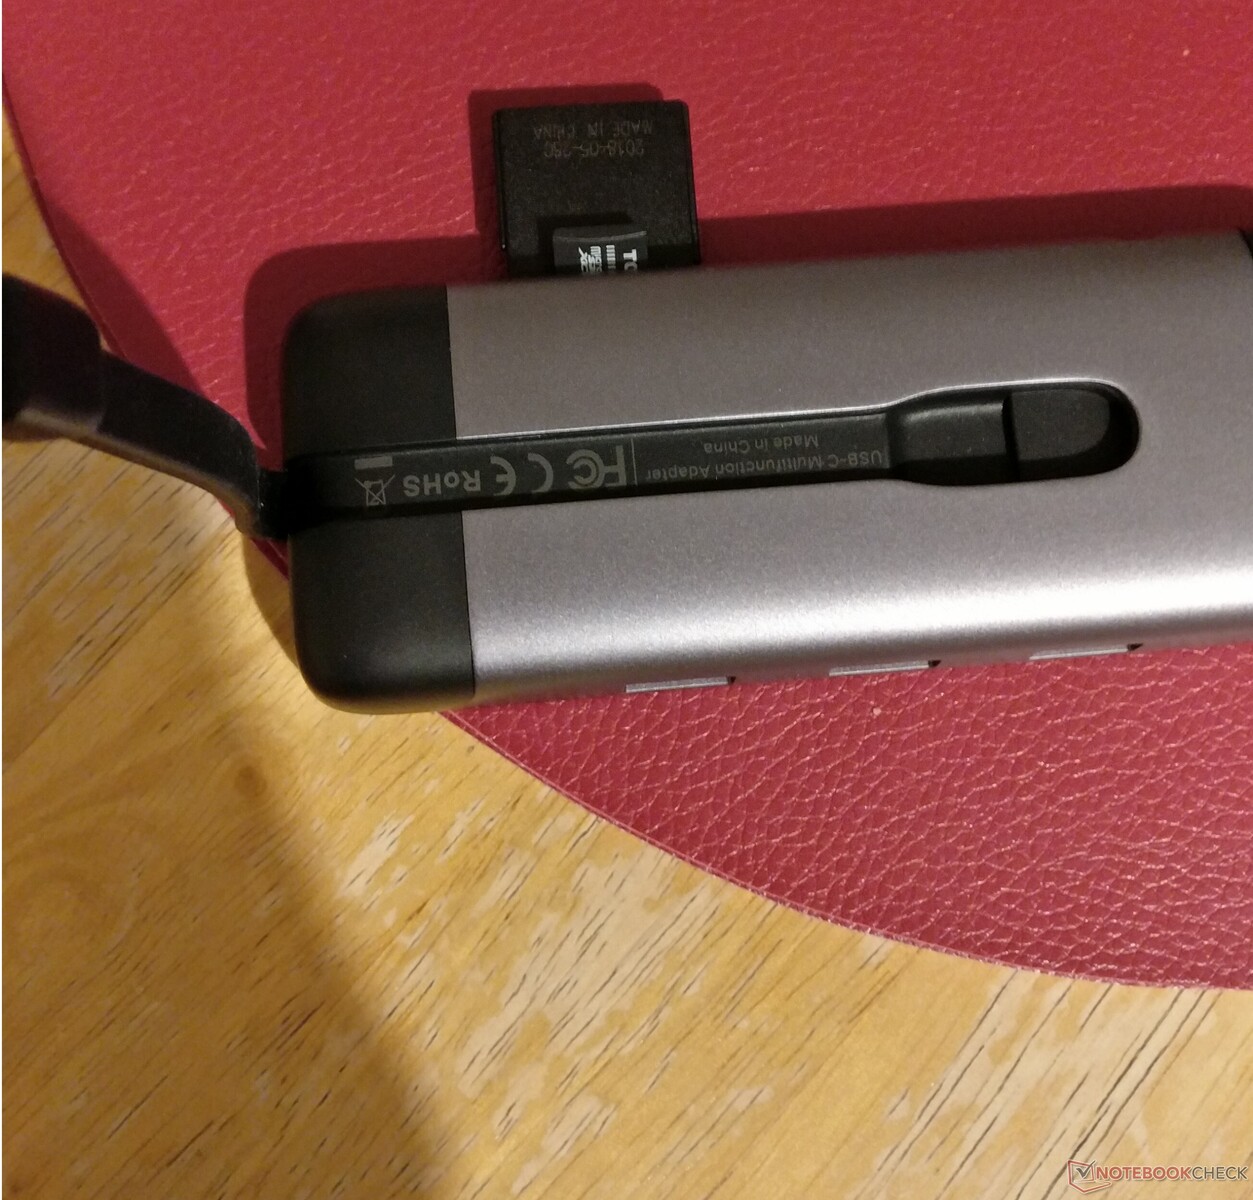 UGREEN USB C 9-in-1 Multiport Docking Station hands-on review